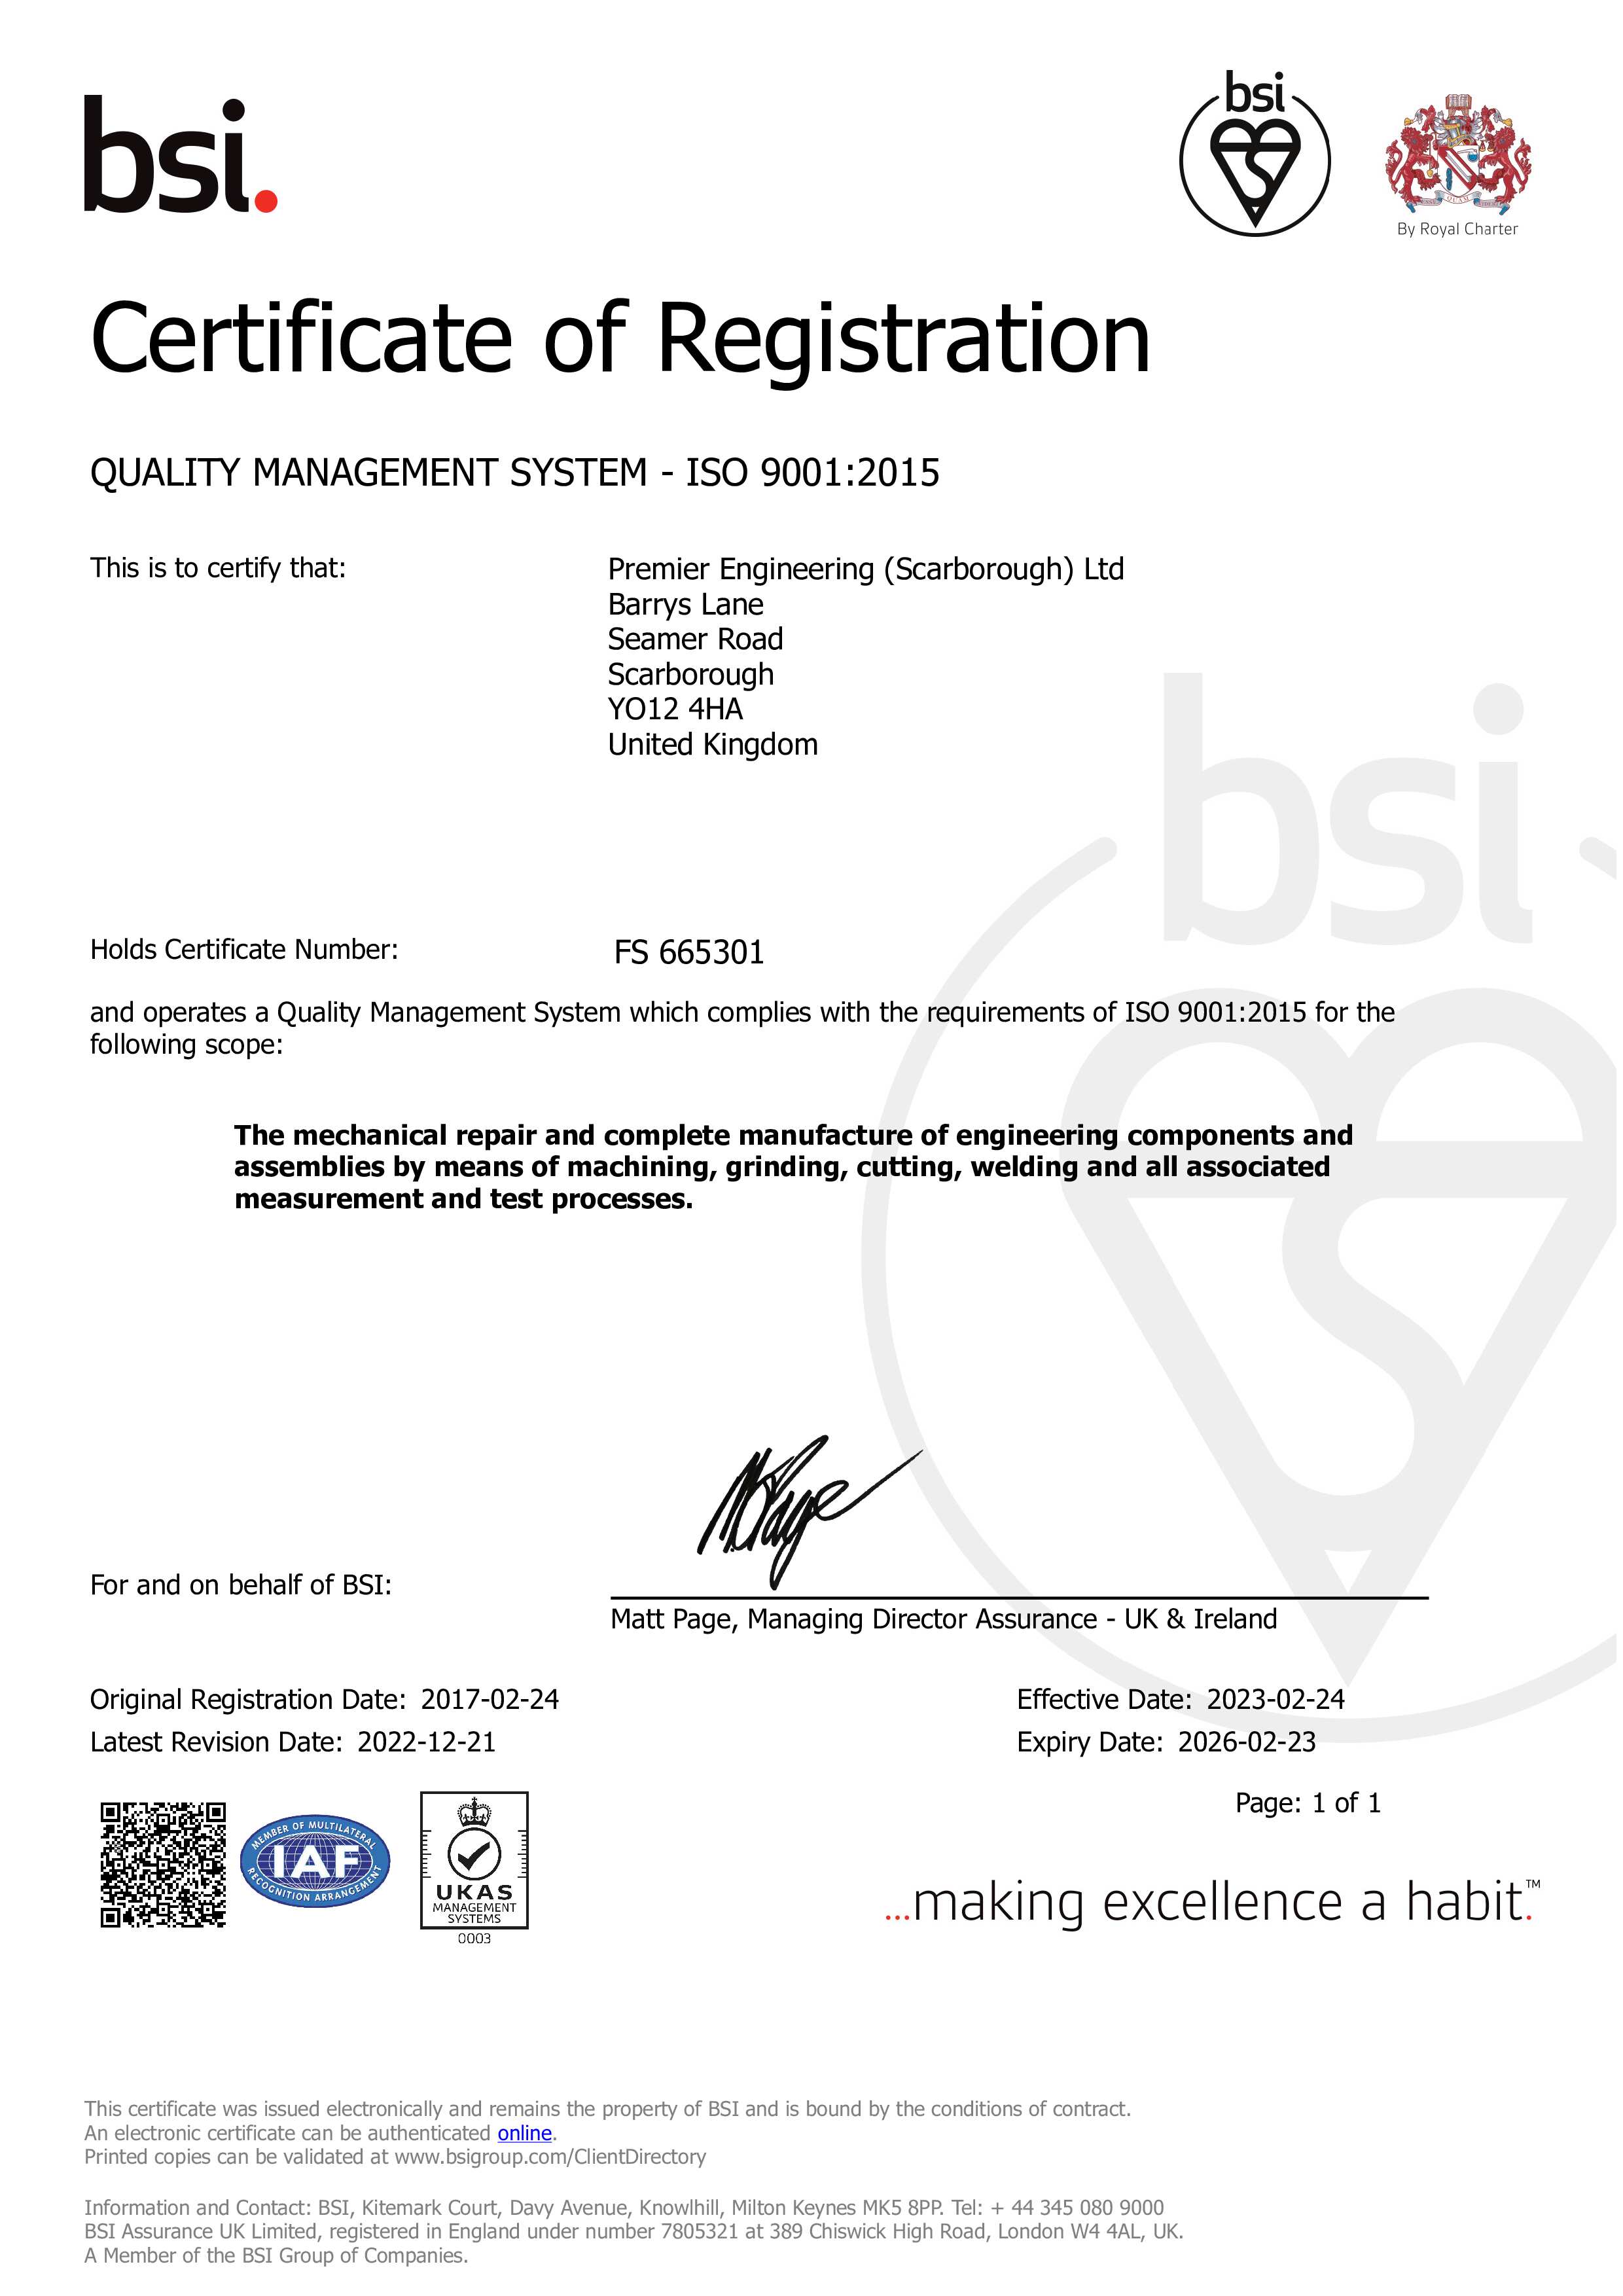 image of accedited ISO 9001:2015 certificate